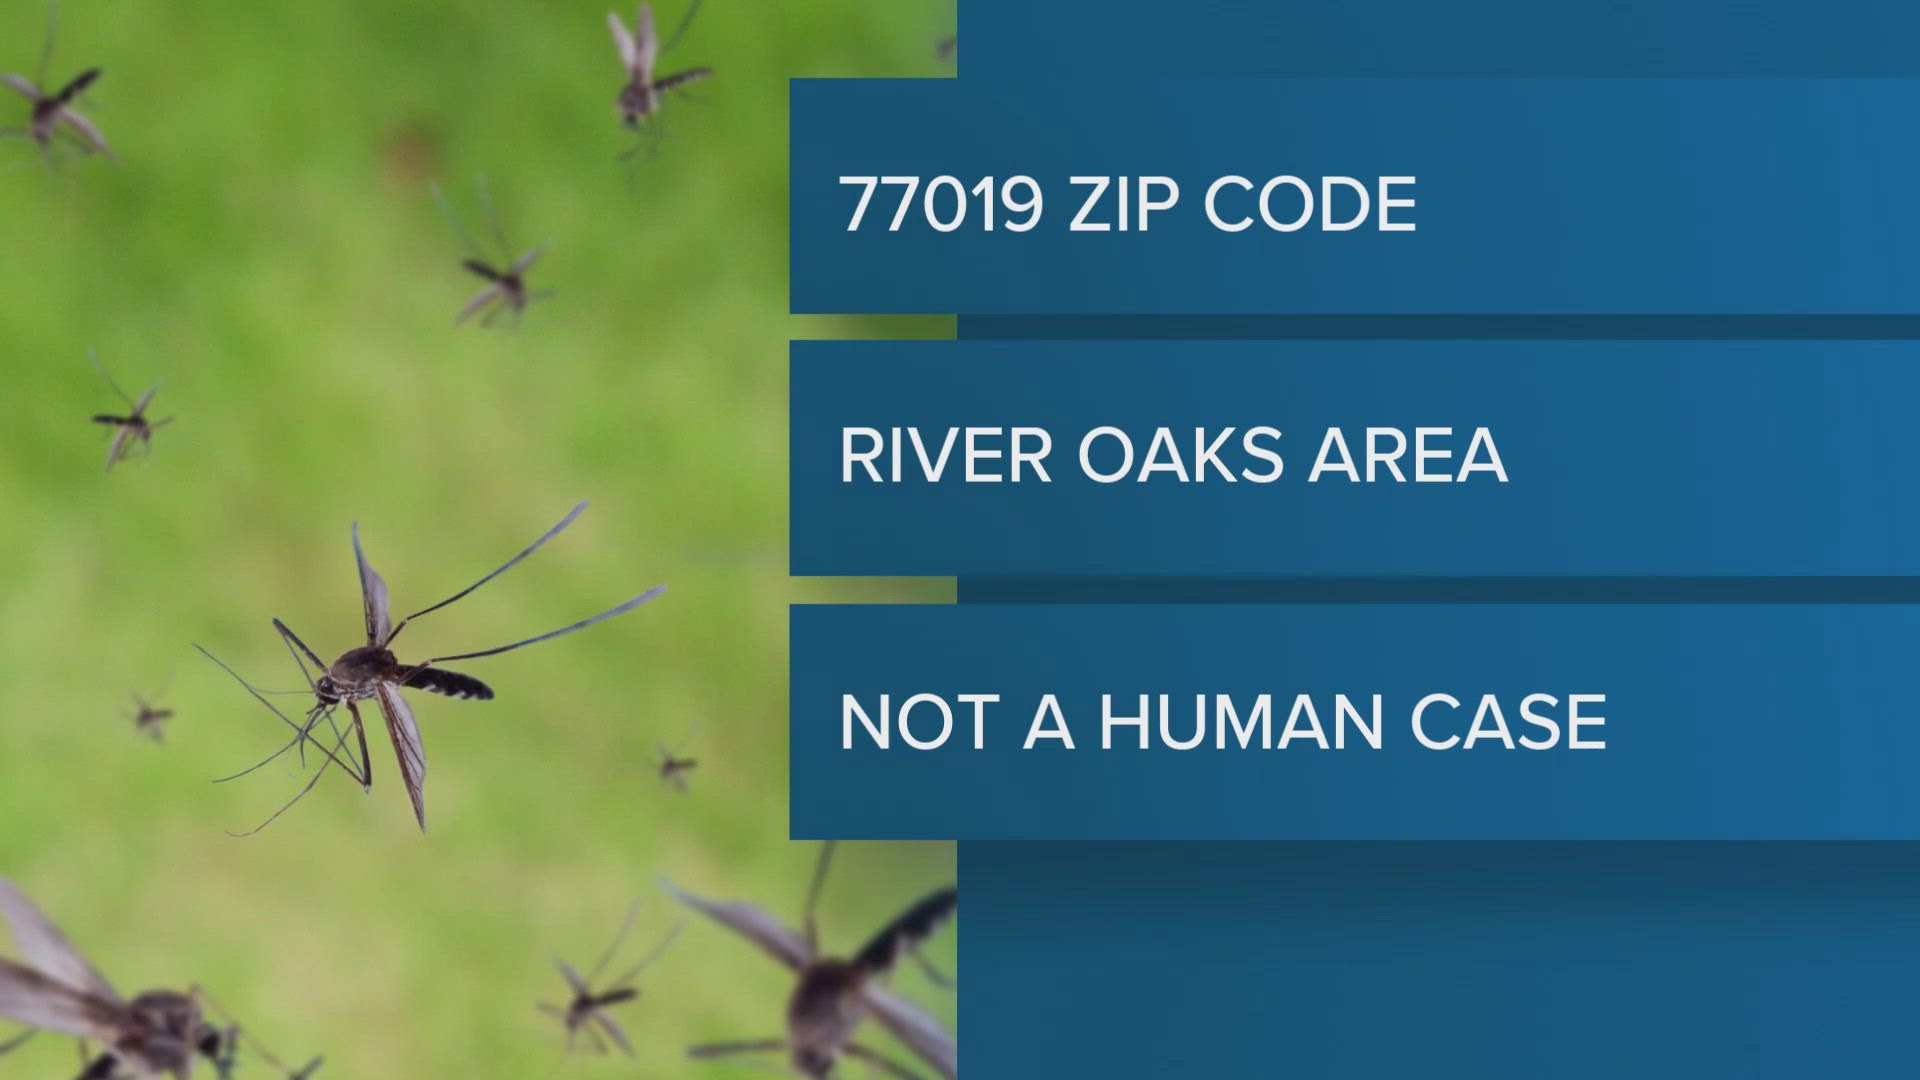 Harris County Public Health’s Mosquito and Vector Control Division collected the sample from a mosquito-trapping site inside the 610 Loop in area code 77019